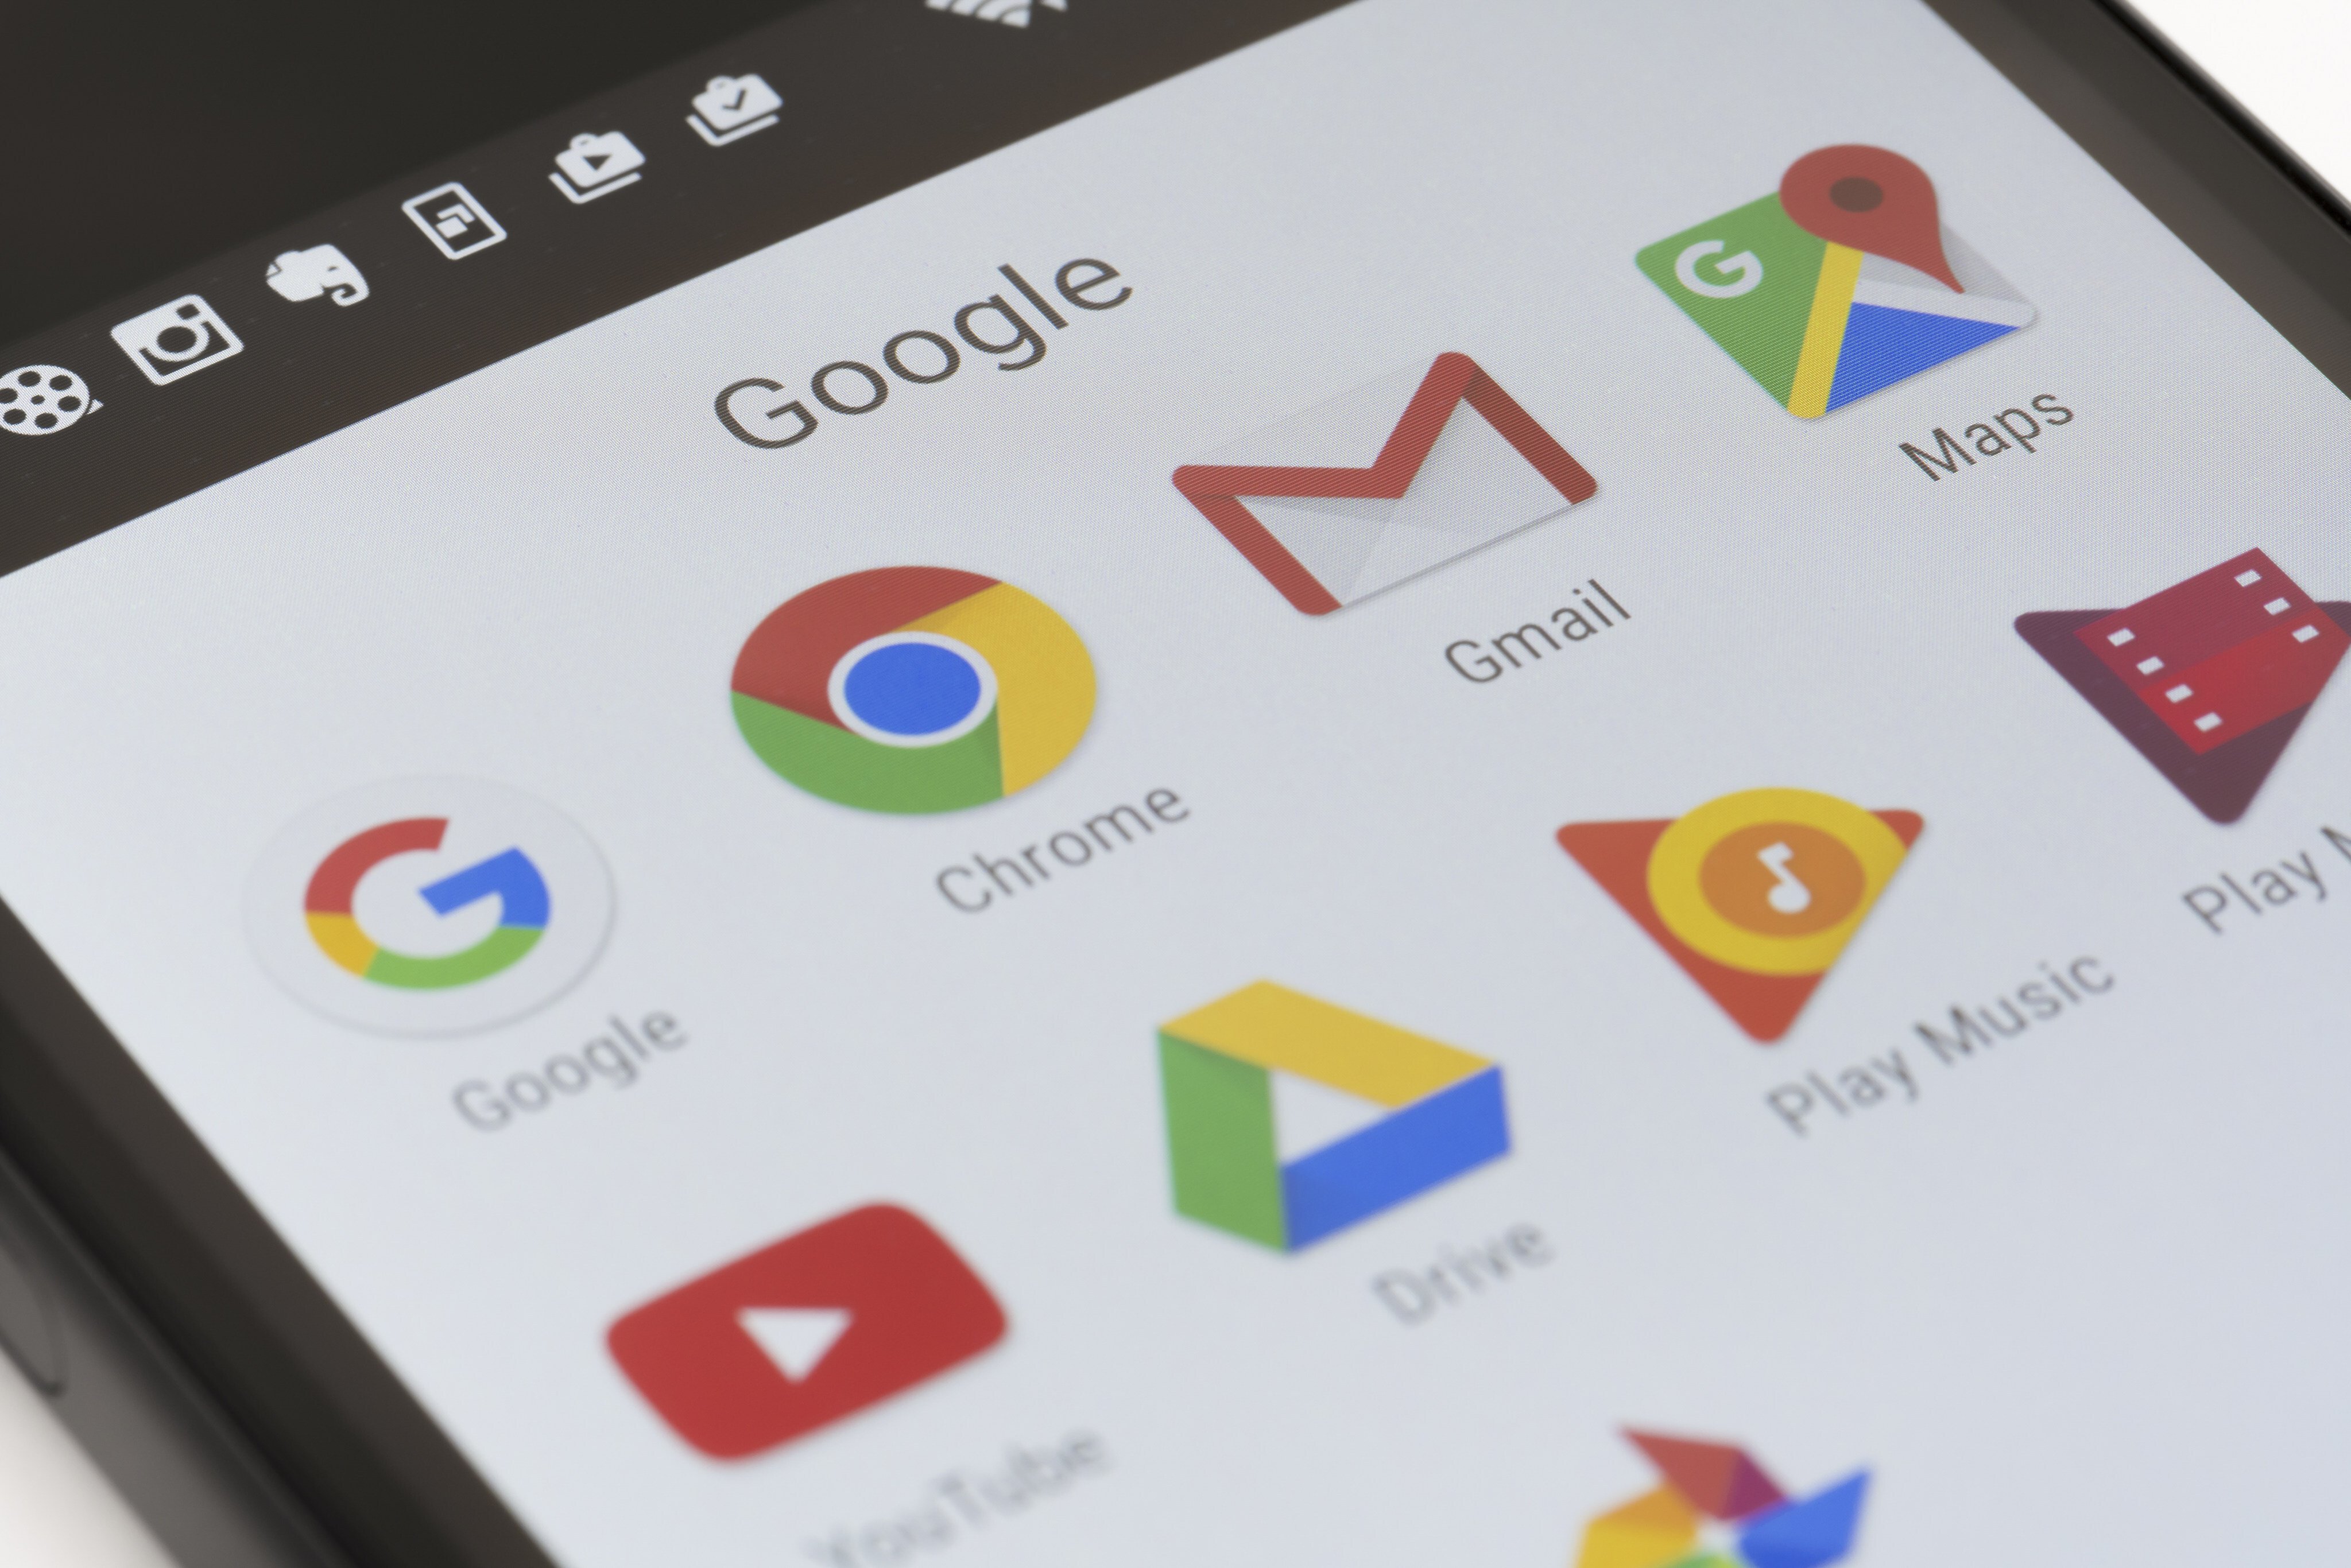 Close-up view of Google apps on a smartphone. Photo: Shutterstock